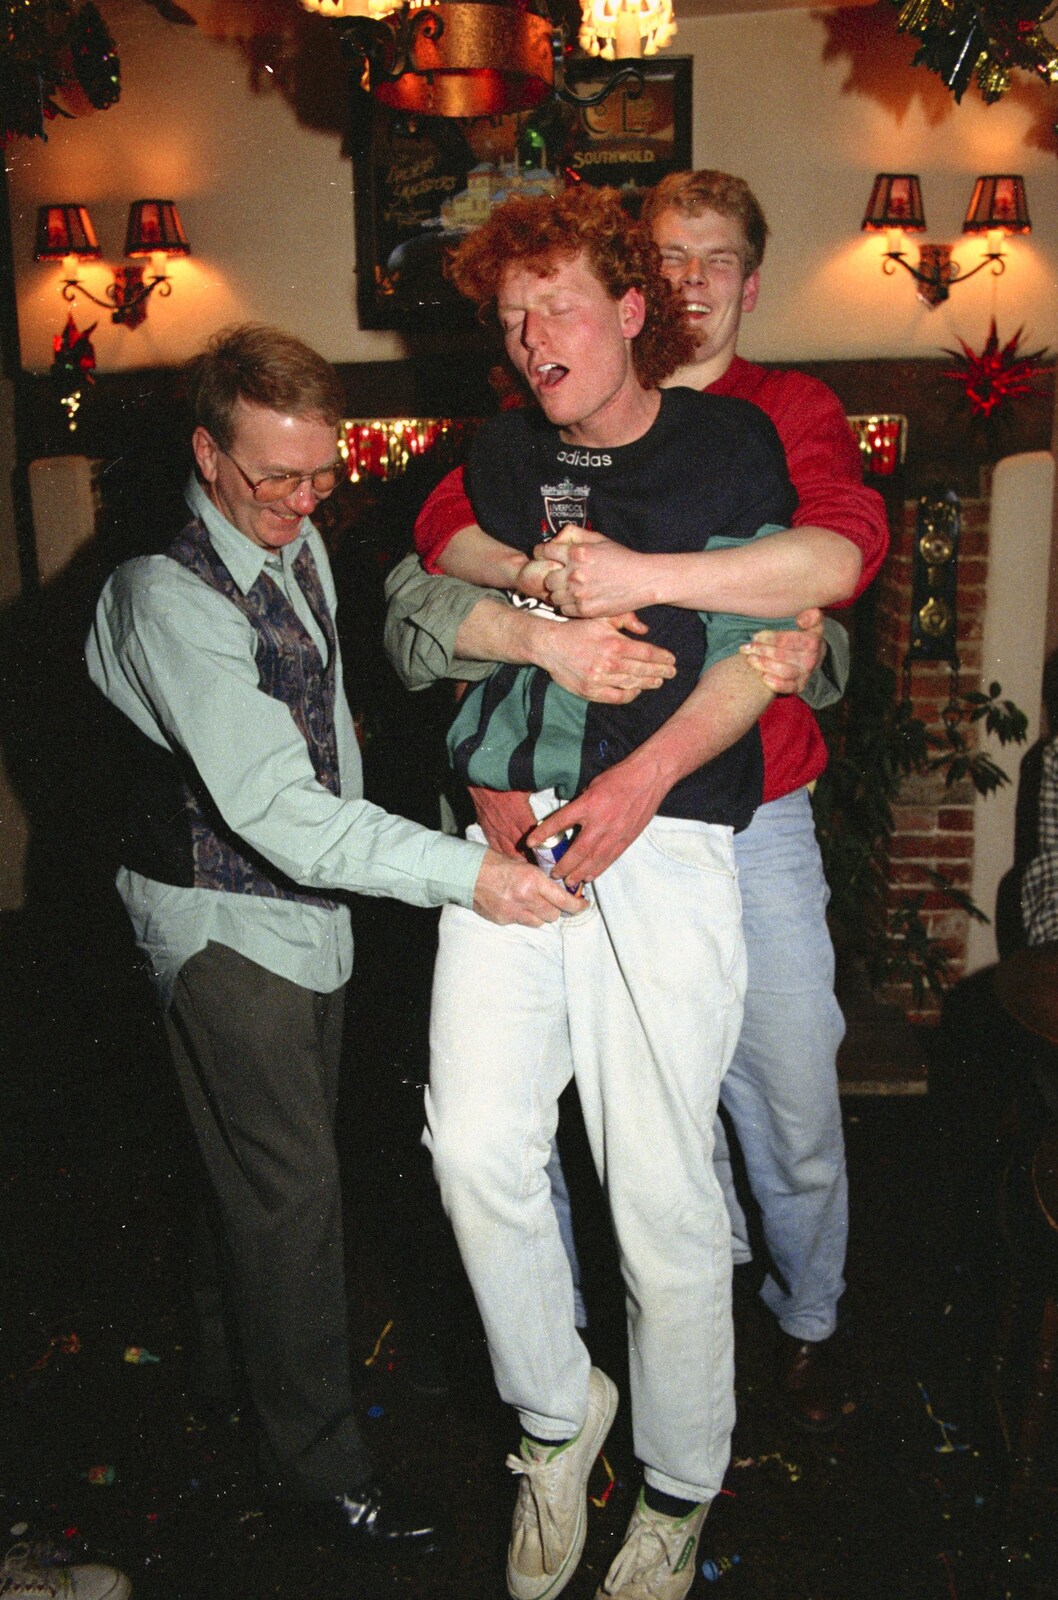 Wavy gets a bottle stuffed down his pants from New Year's Eve at the Swan Inn, Brome, Suffolk - 31st December 1994